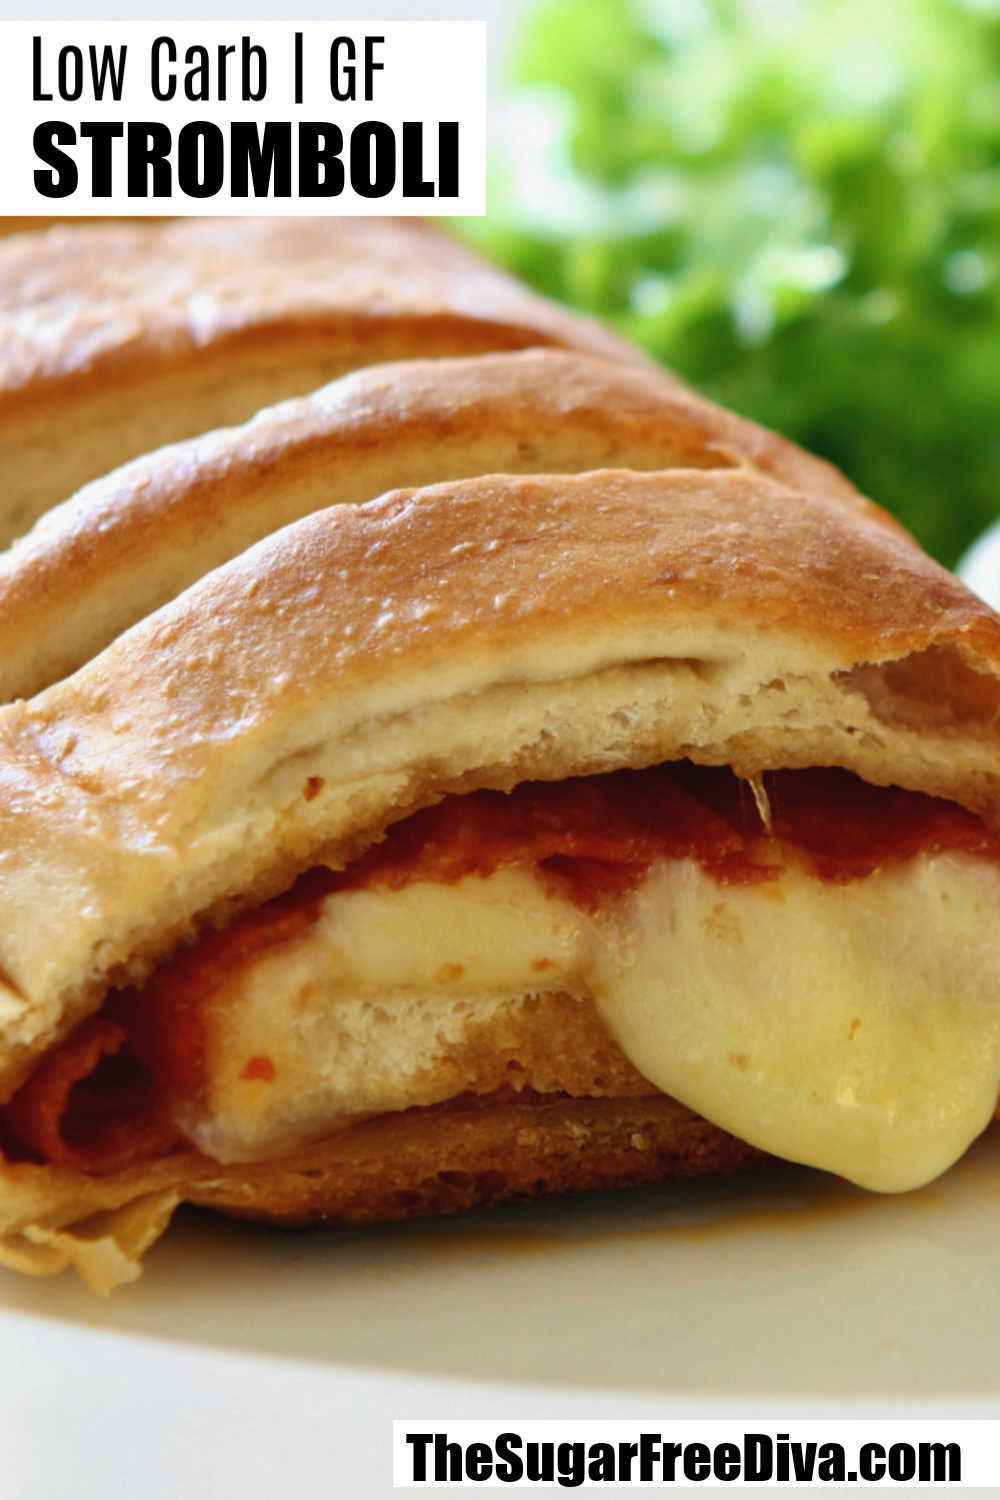 How to Make a Low Carb Stromboli 